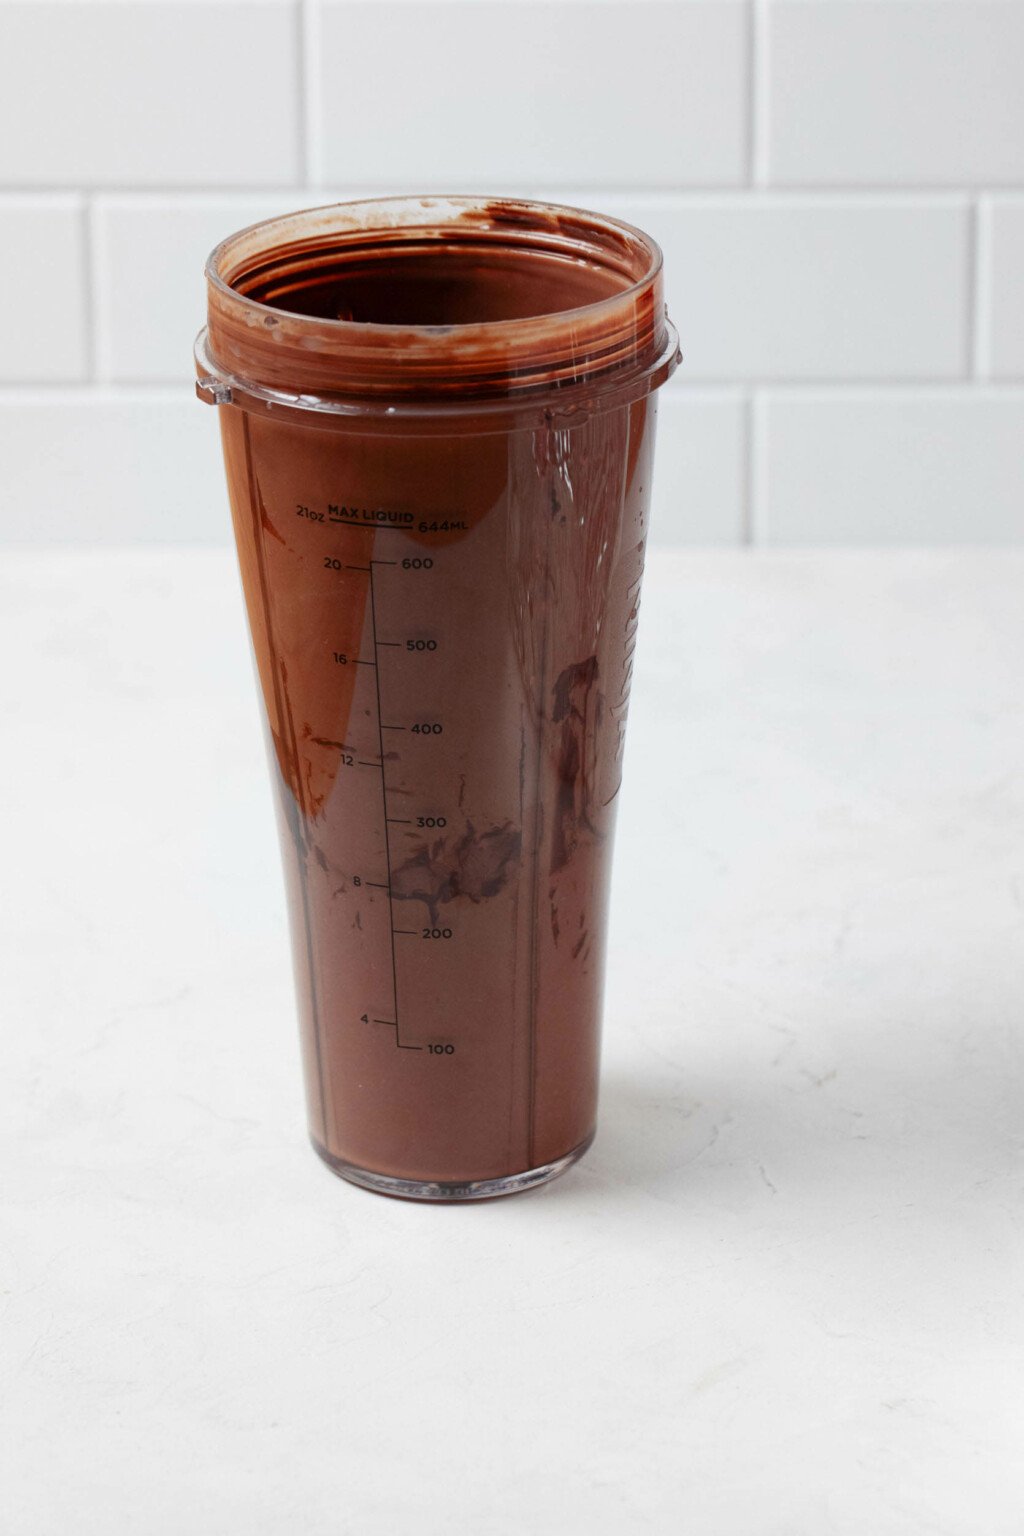 The container of a portable blender is filled with a rich, chocolate mixture.